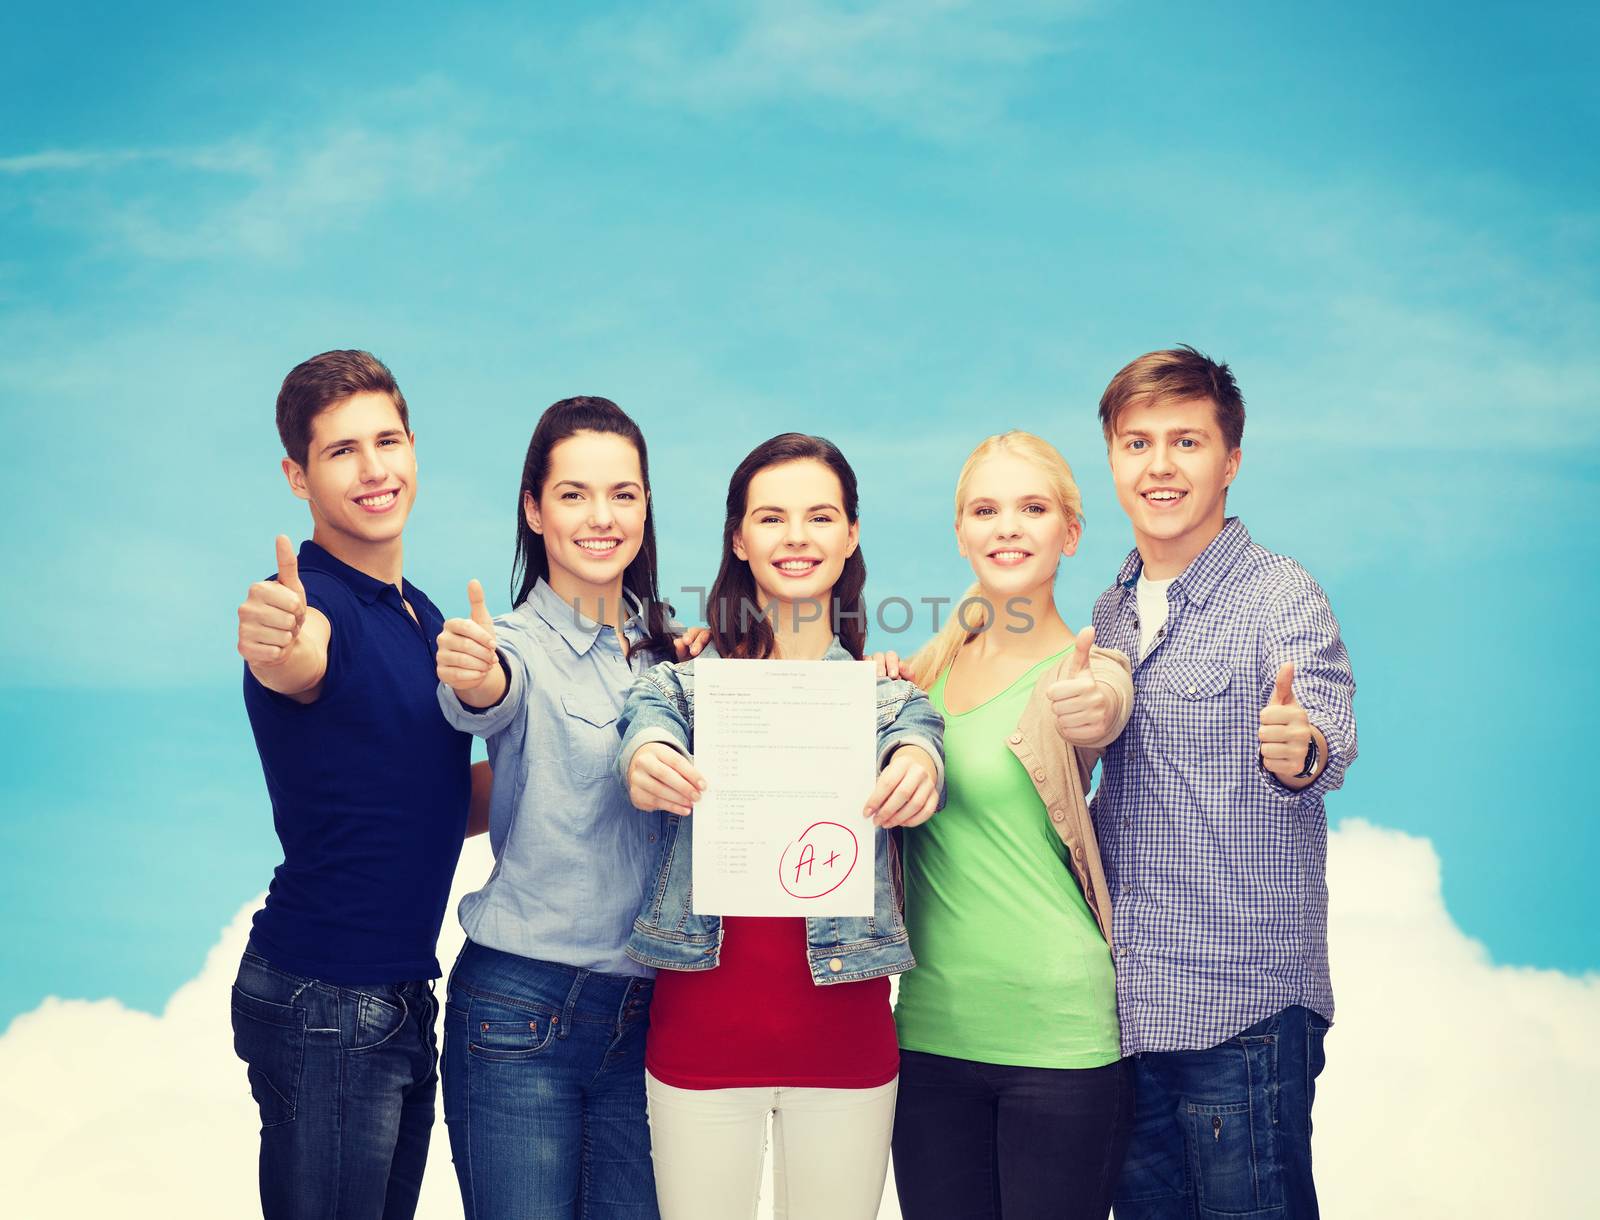 education and people concept - group of smiling students standing and showing test and thumbs up over blue sky background